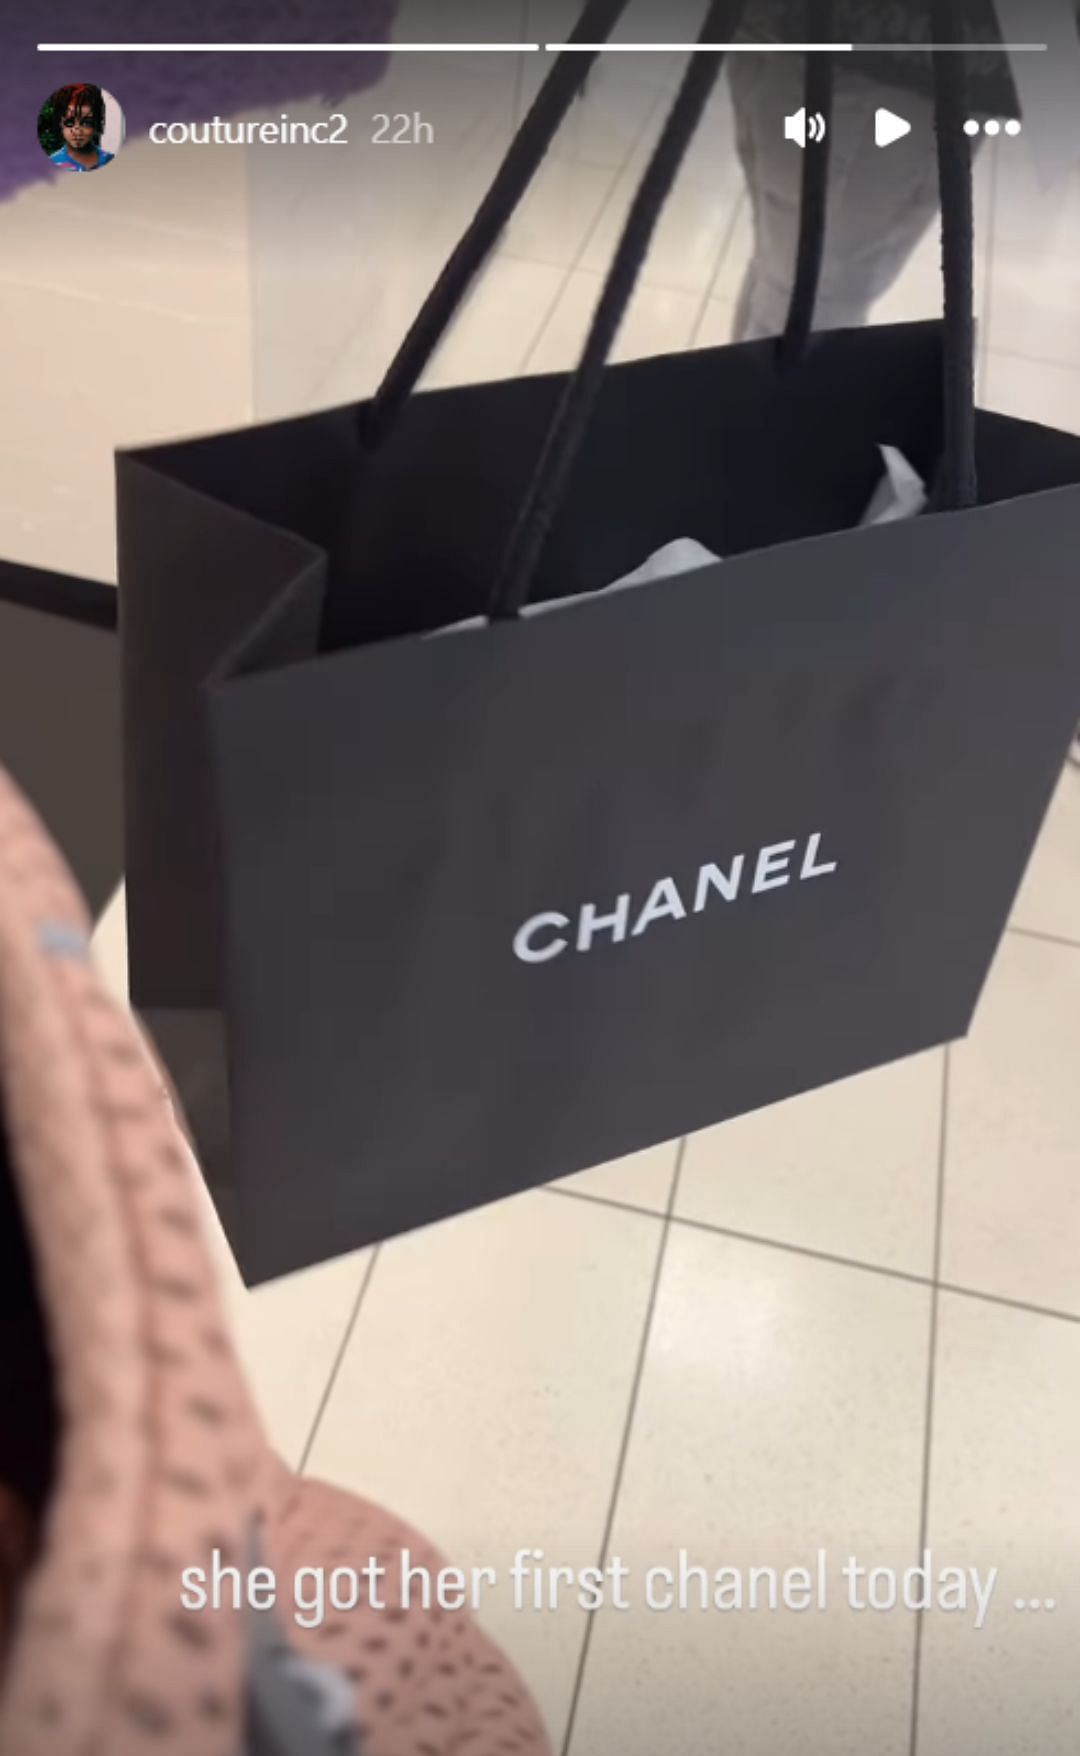 Jeanine Robel&#039;s Instagram story features her purchase from Chanel for her newborn daughter